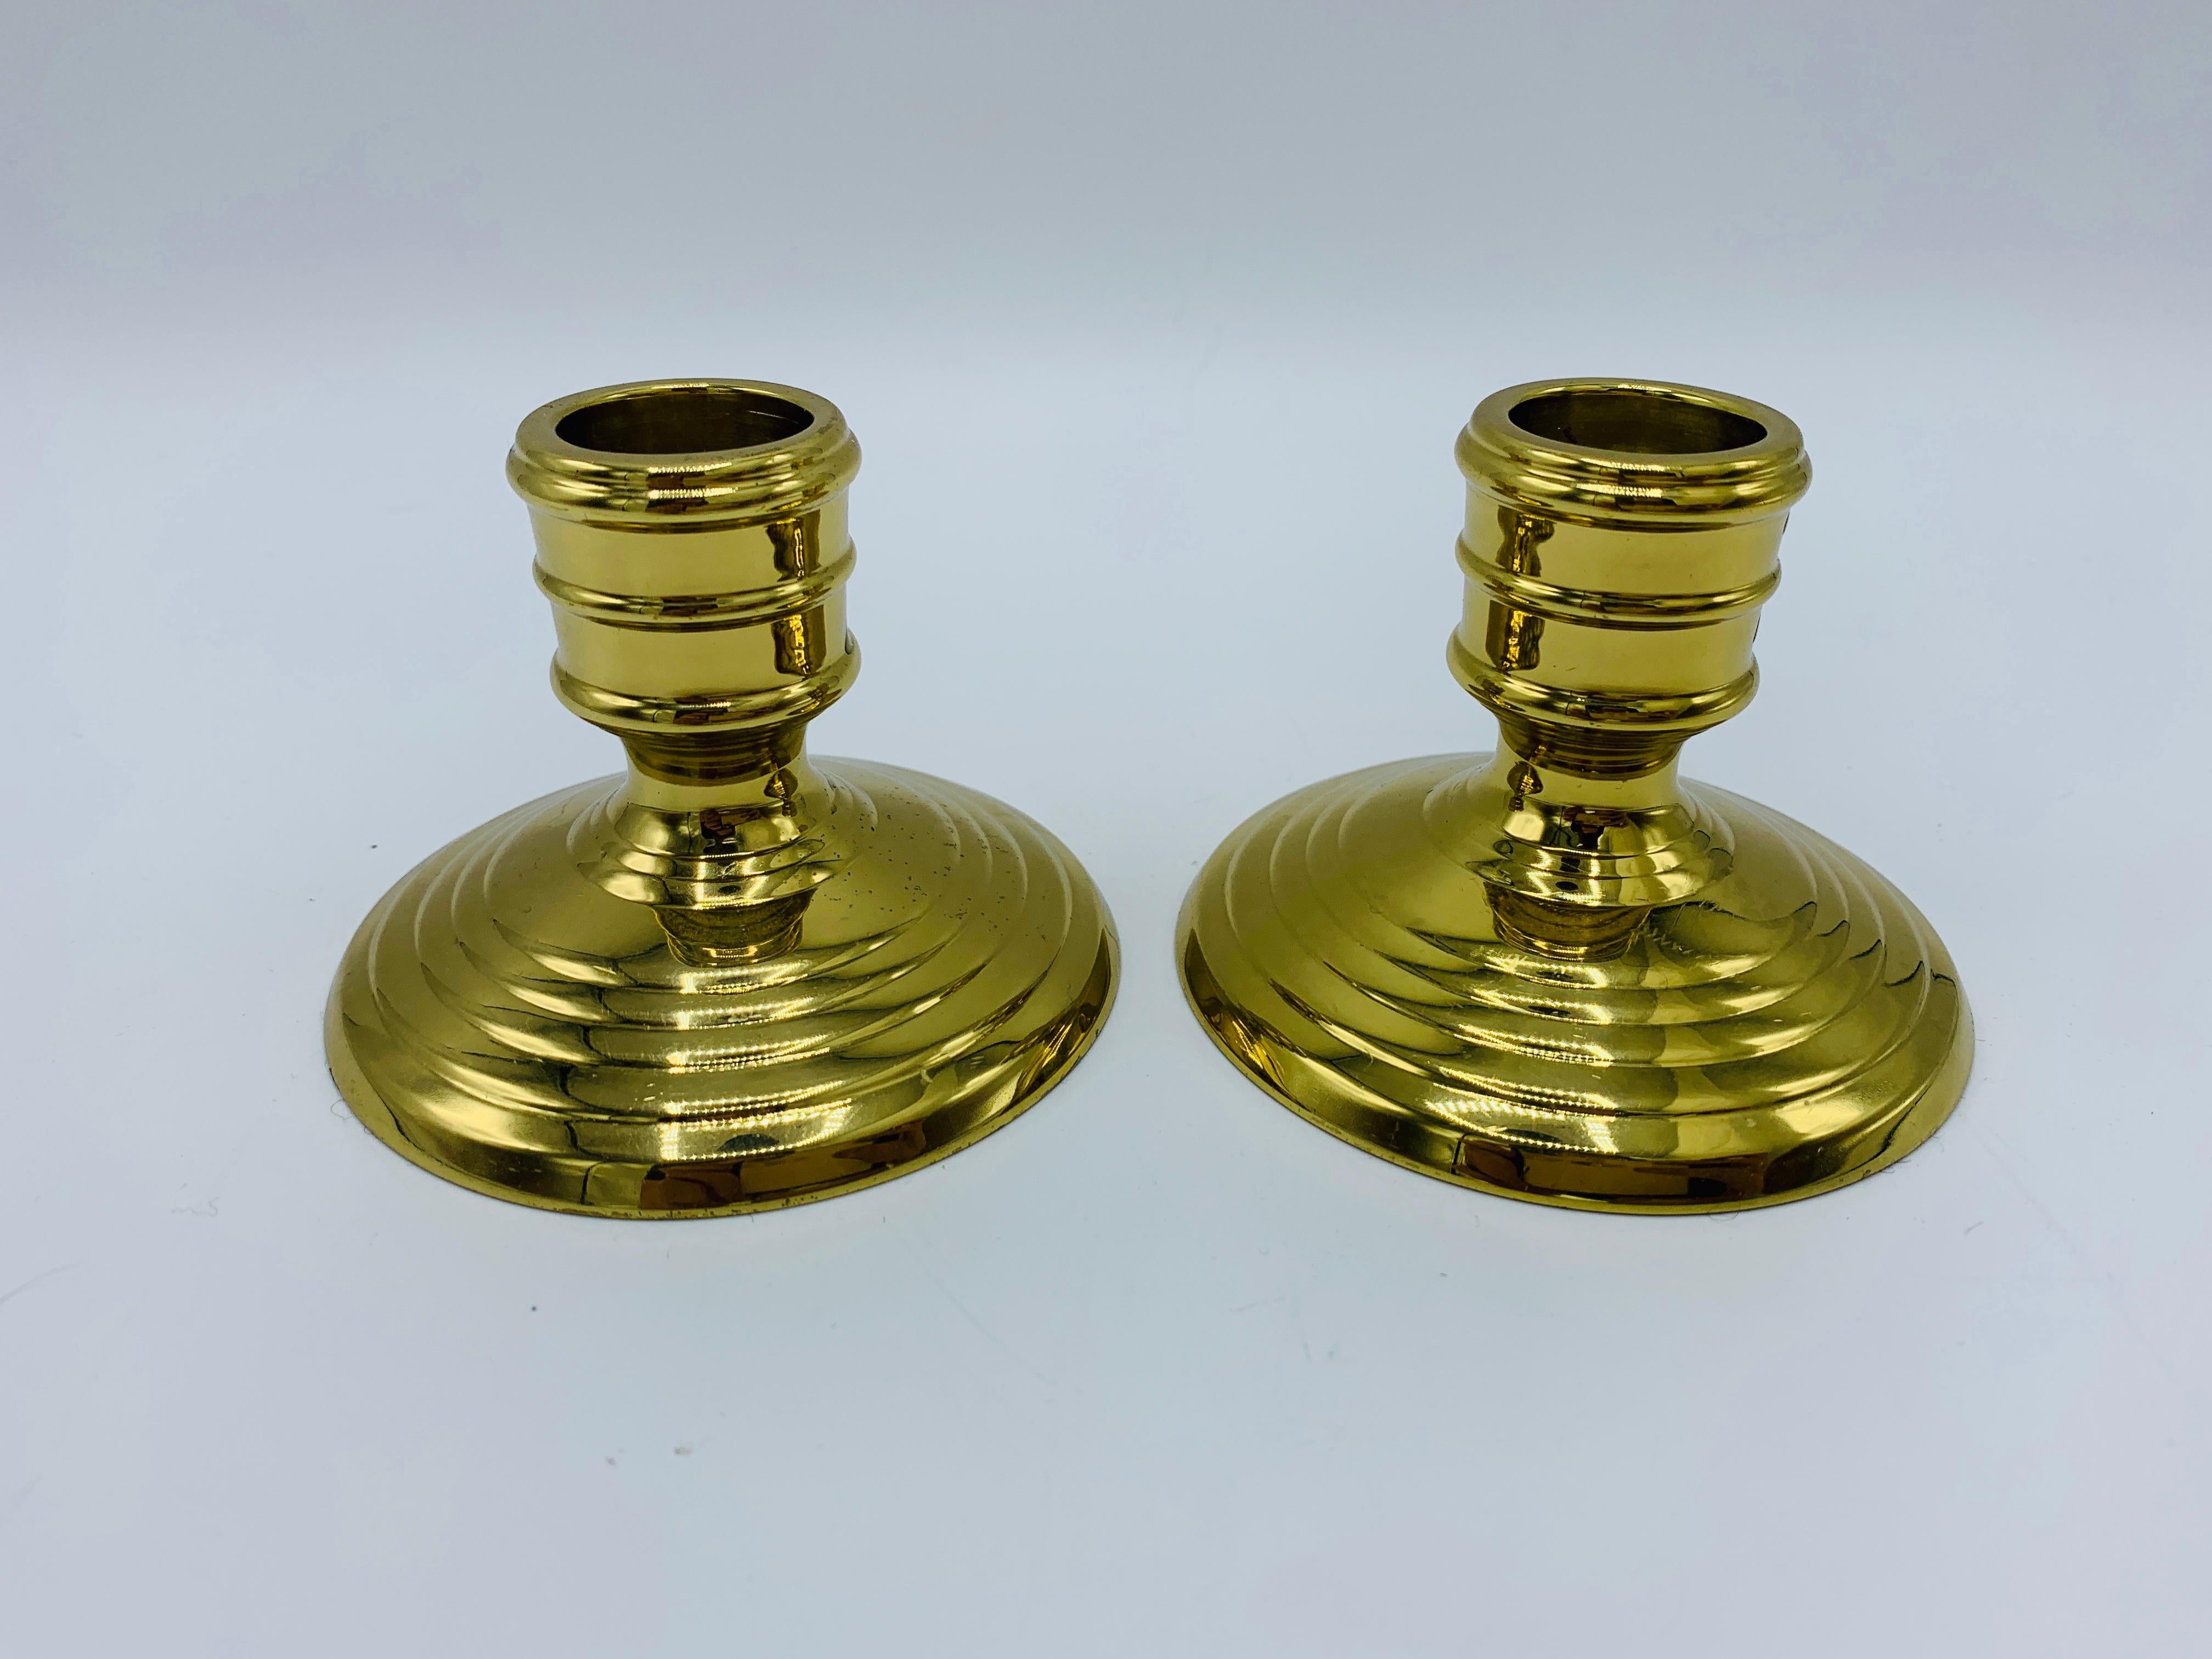 American Classical 1950s Virginia Metalcrafters Brass Candlesticks, Pair For Sale